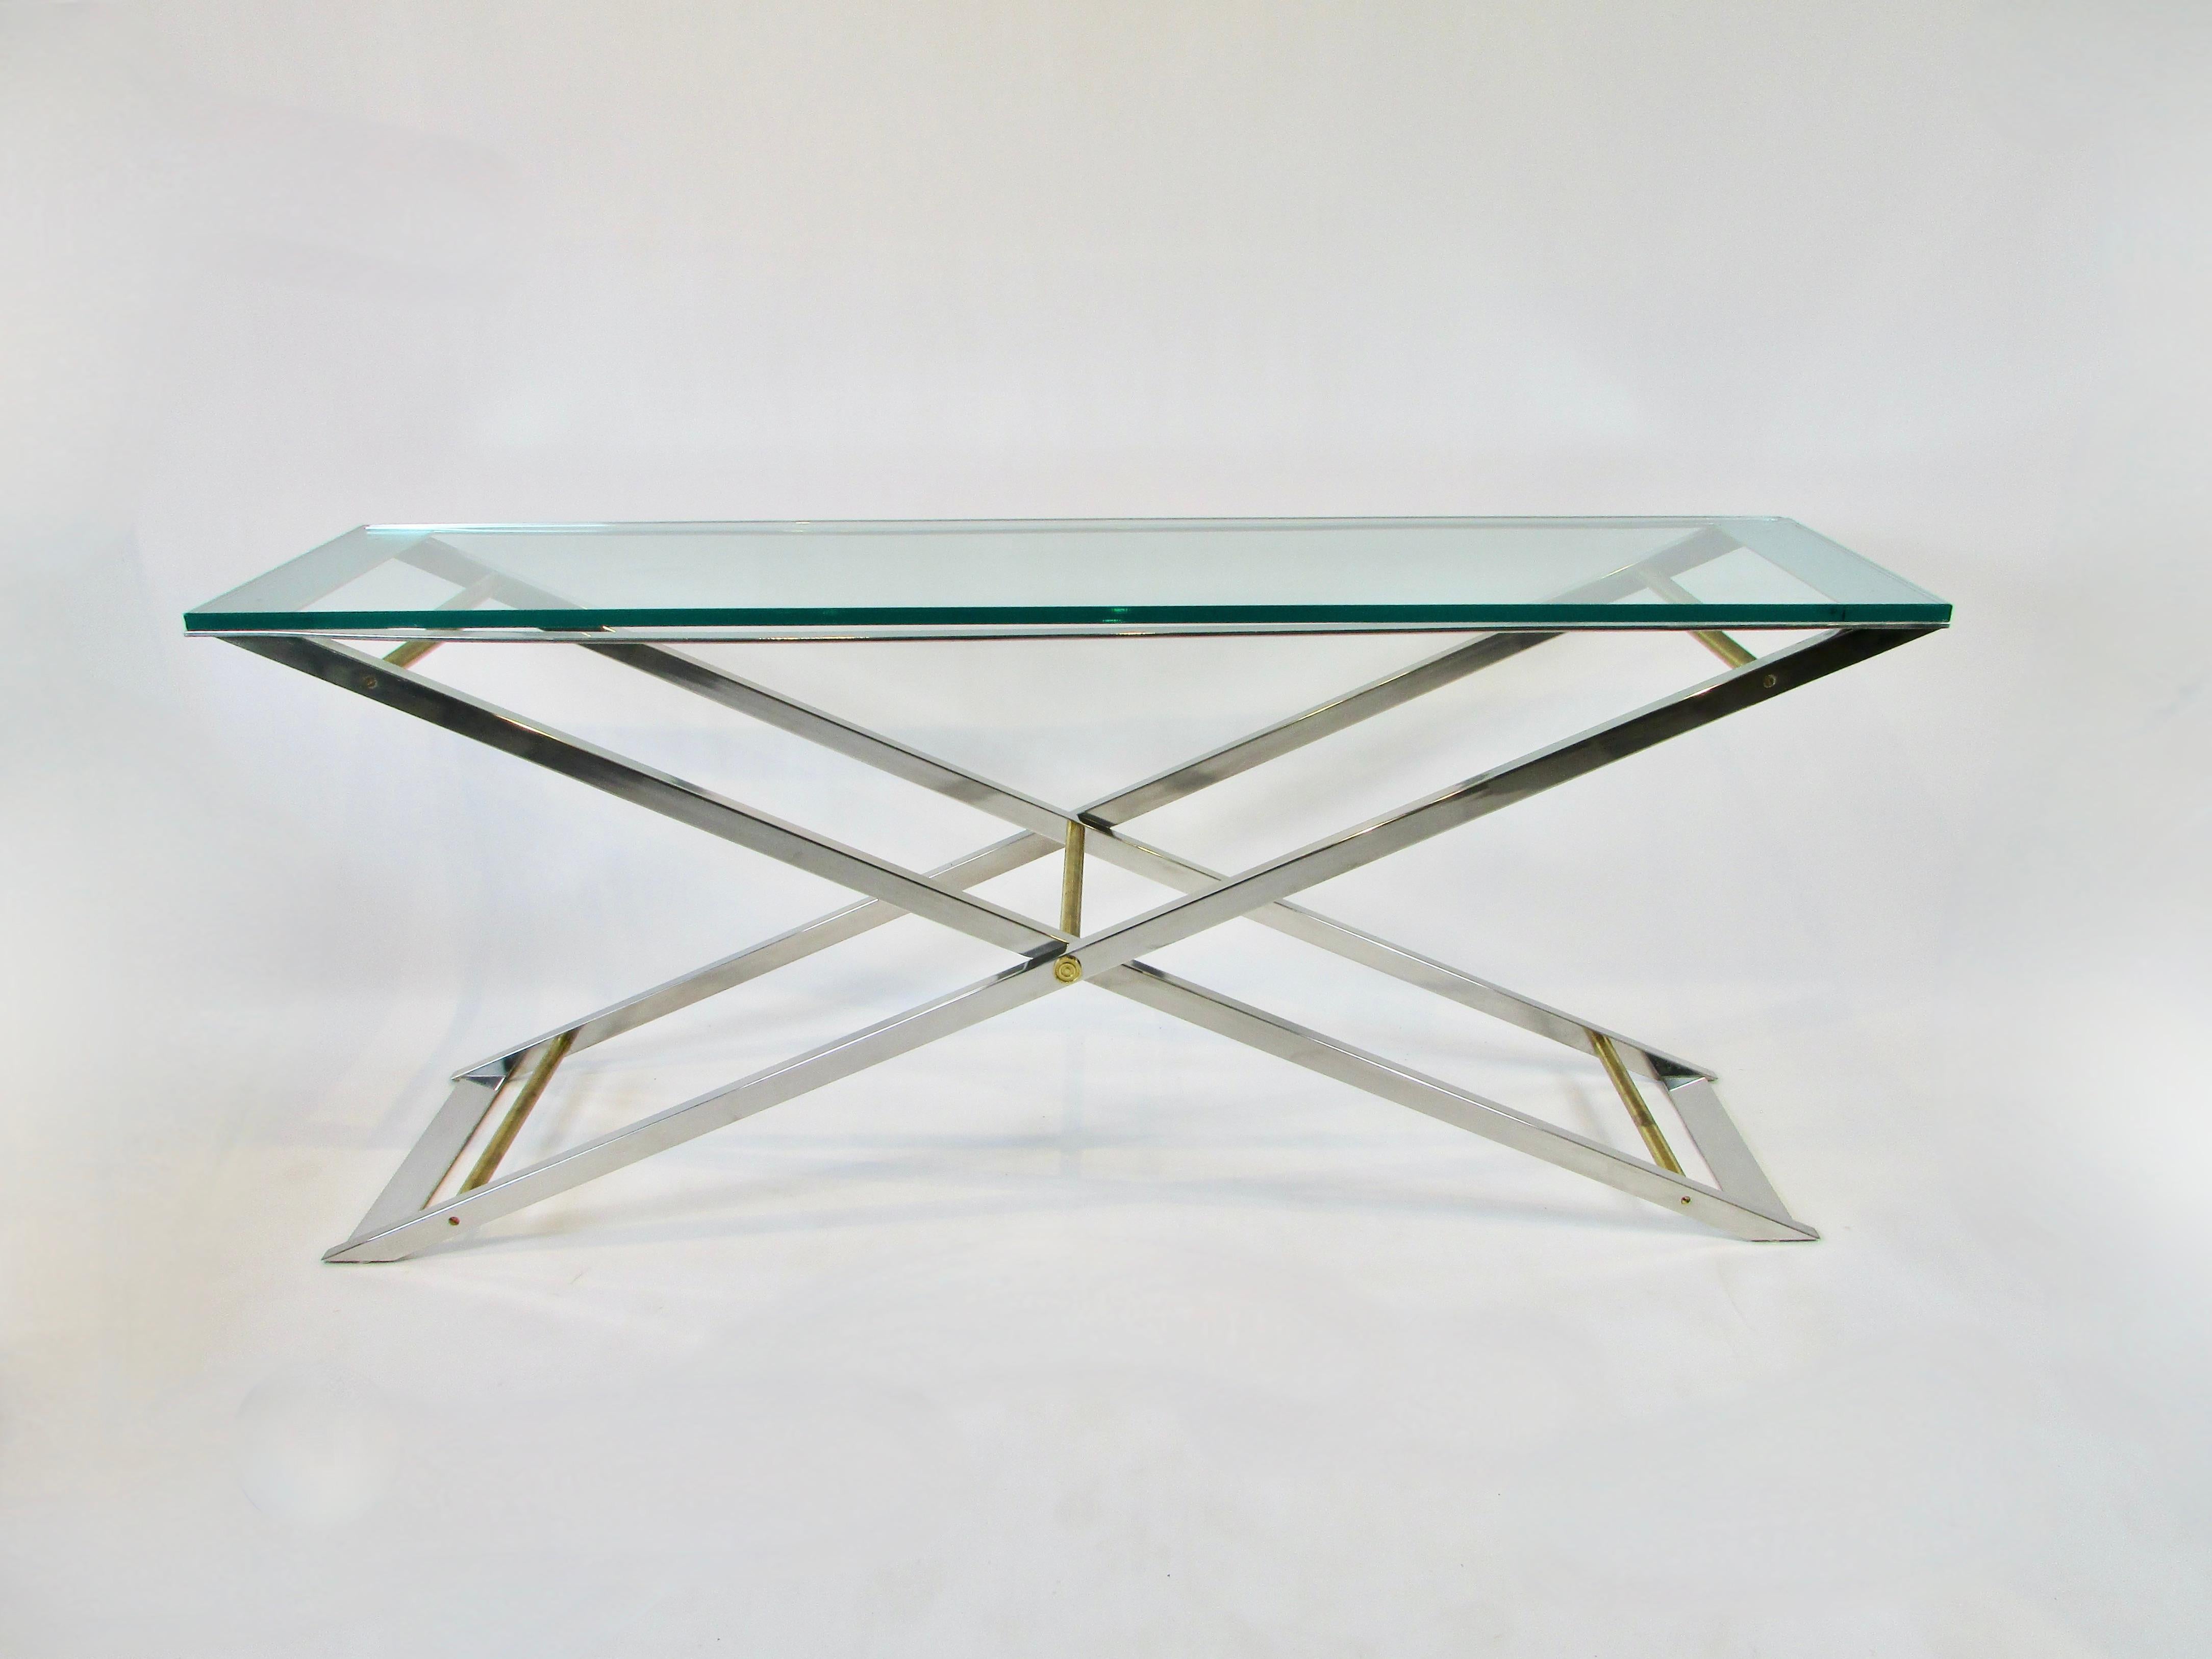 Six foot long polished aluminum stainless steel and brass console table. Designed along the lines of a John Vessey piece using multiple types of metal. Chrome frame is in fine condition. Brass stretcher bars show patina. 3/4